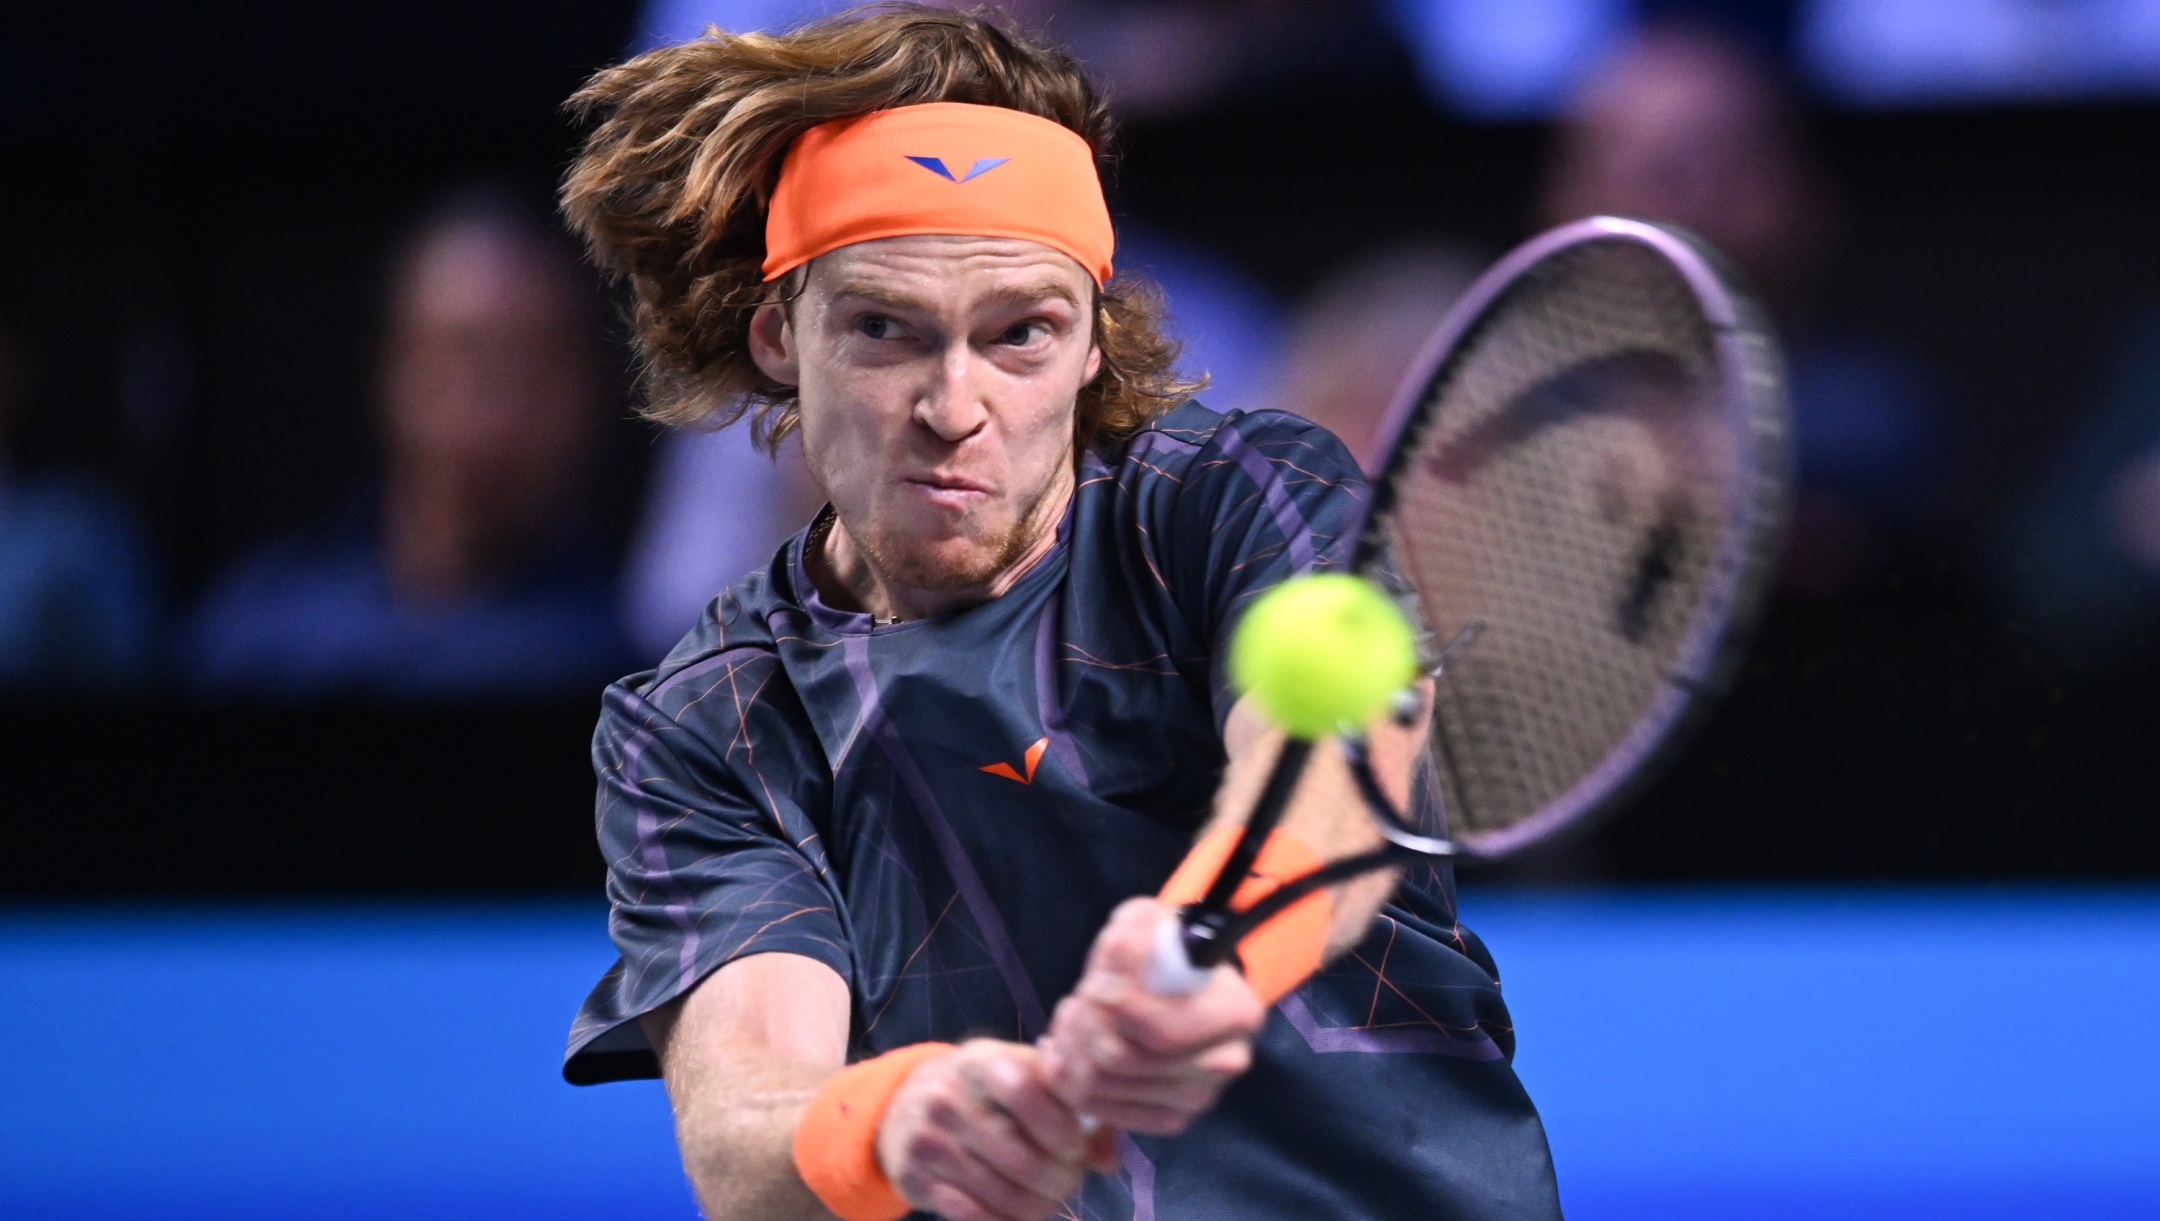 VIENNA, AUSTRIA - OCTOBER 28: Andrey Rublev of Russia plays a backhand in his semi-final match against Jannik Sinner of Italy during day eight of the Erste Bank Open 2023 at Wiener Stadthalle on October 28, 2023 in Vienna, Austria. (Photo by Thomas Kronsteiner/Getty Images)